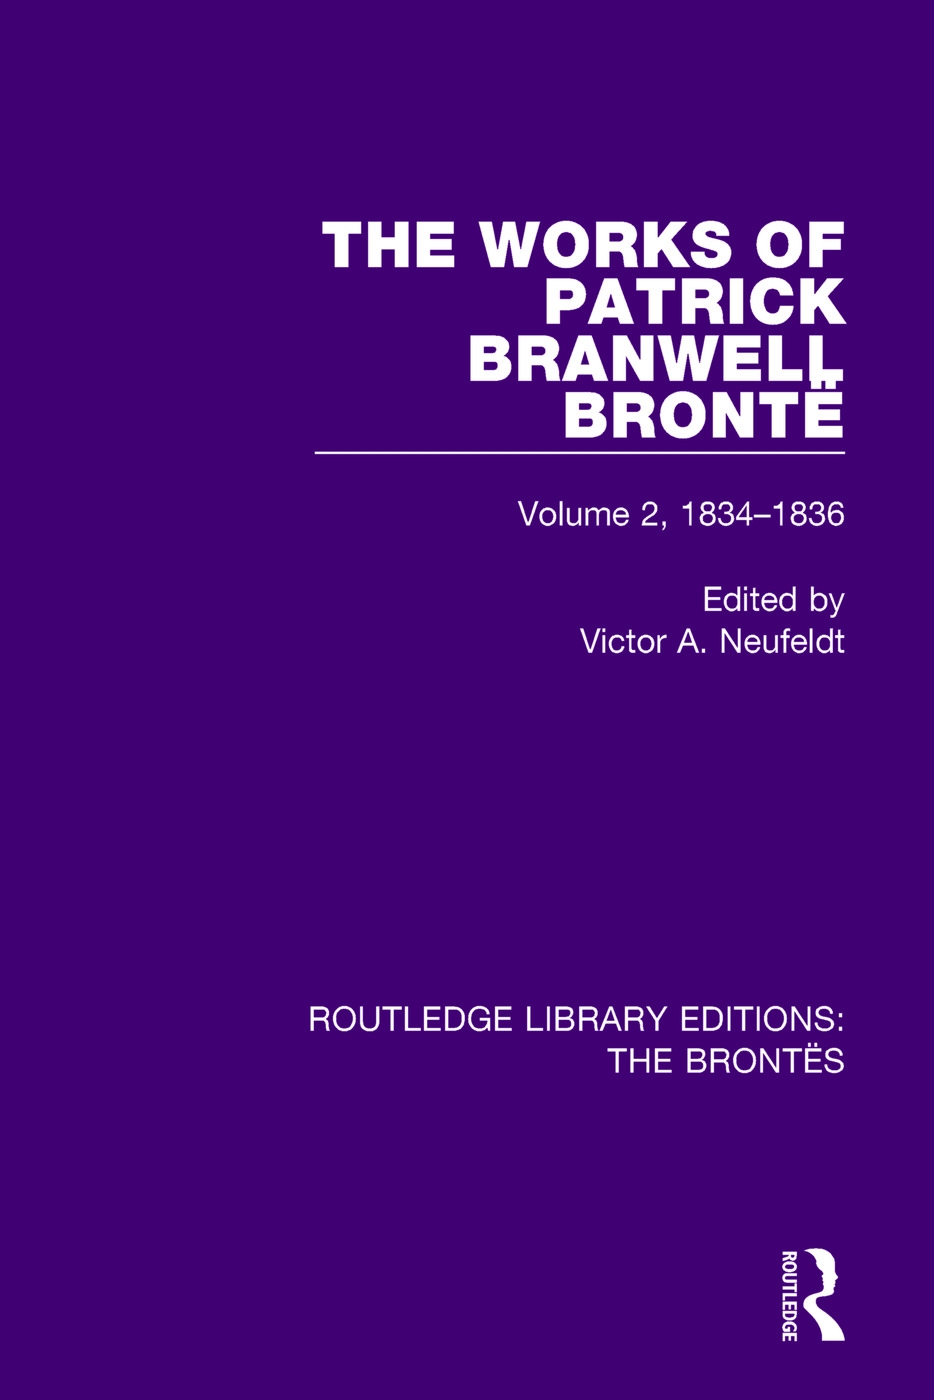 The Works of Patrick Branwell Bronte 1834-1836